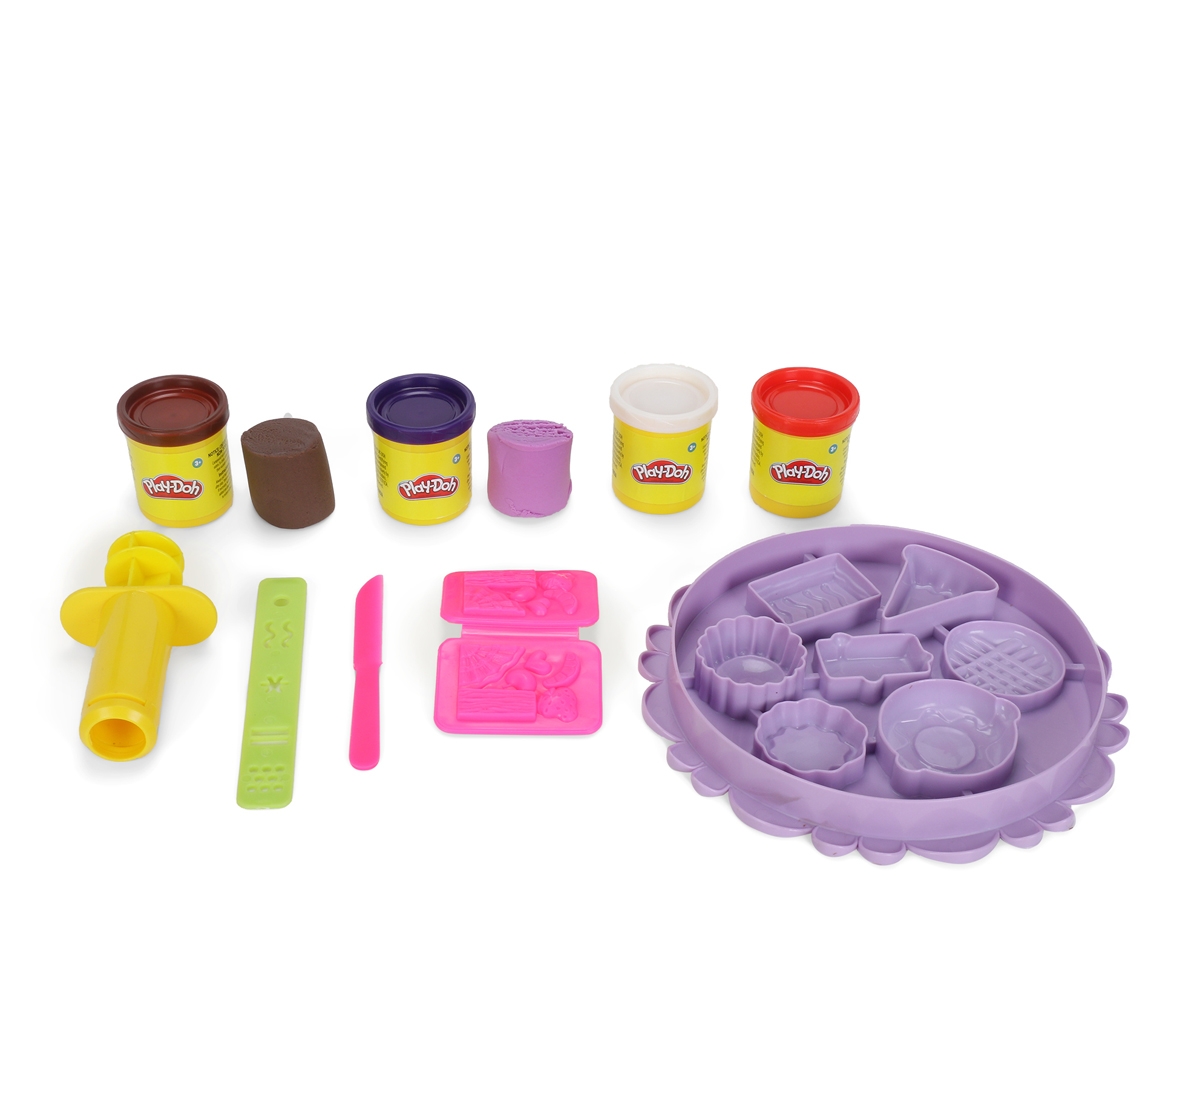 Play-Doh | Play Doh Sweet Treats Playset for Kids 3Y+, Multicolour 1